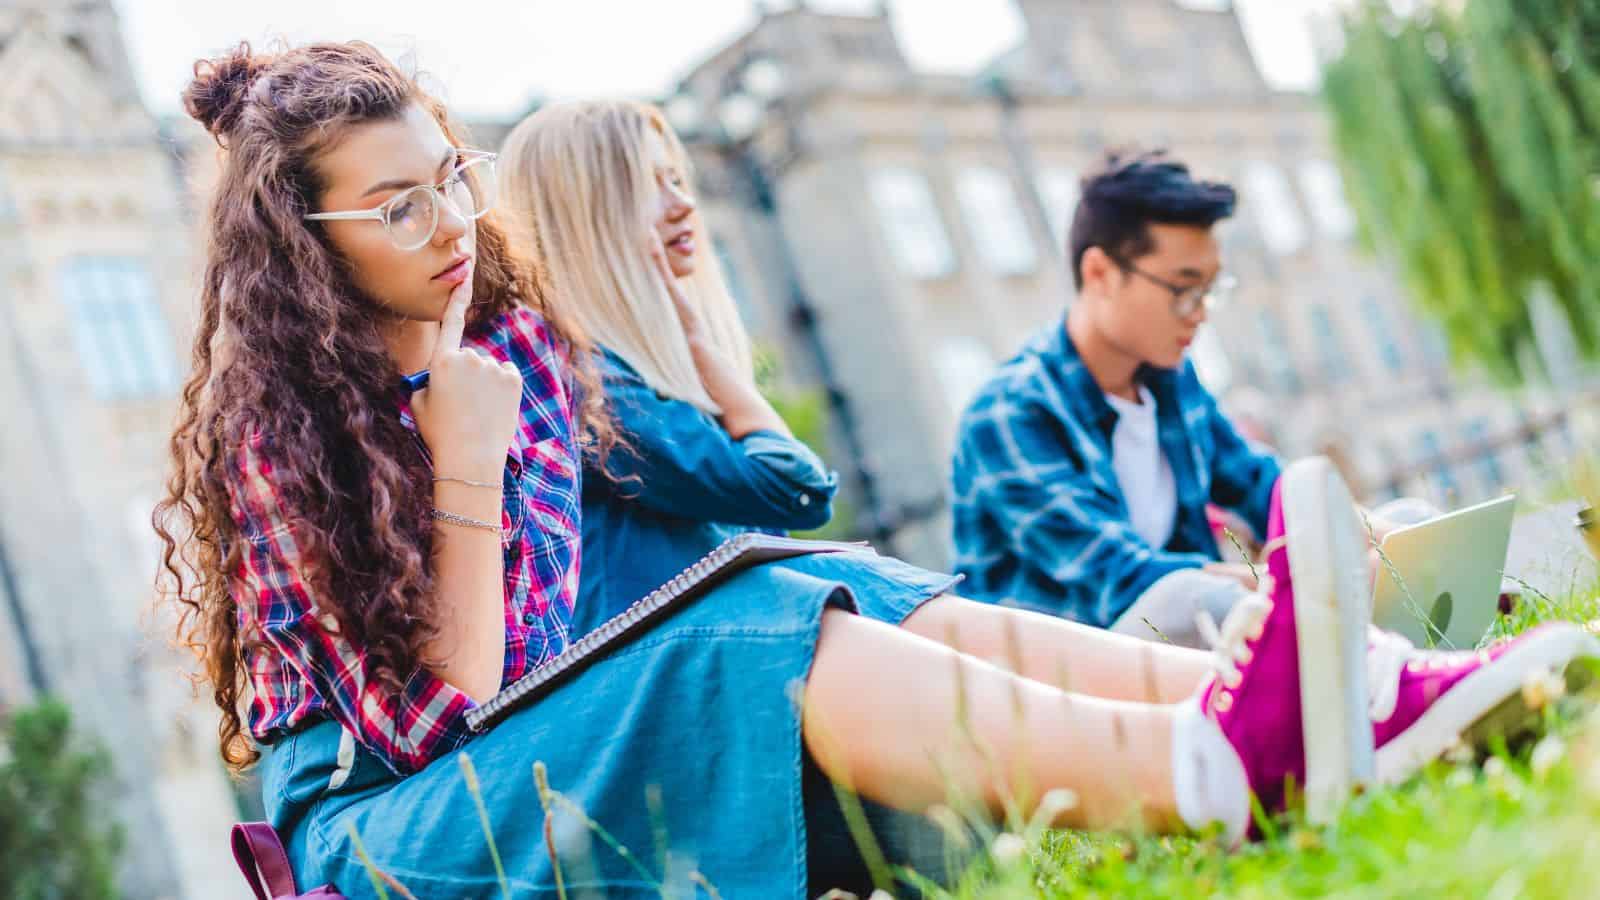 Students sitting on green grass in park